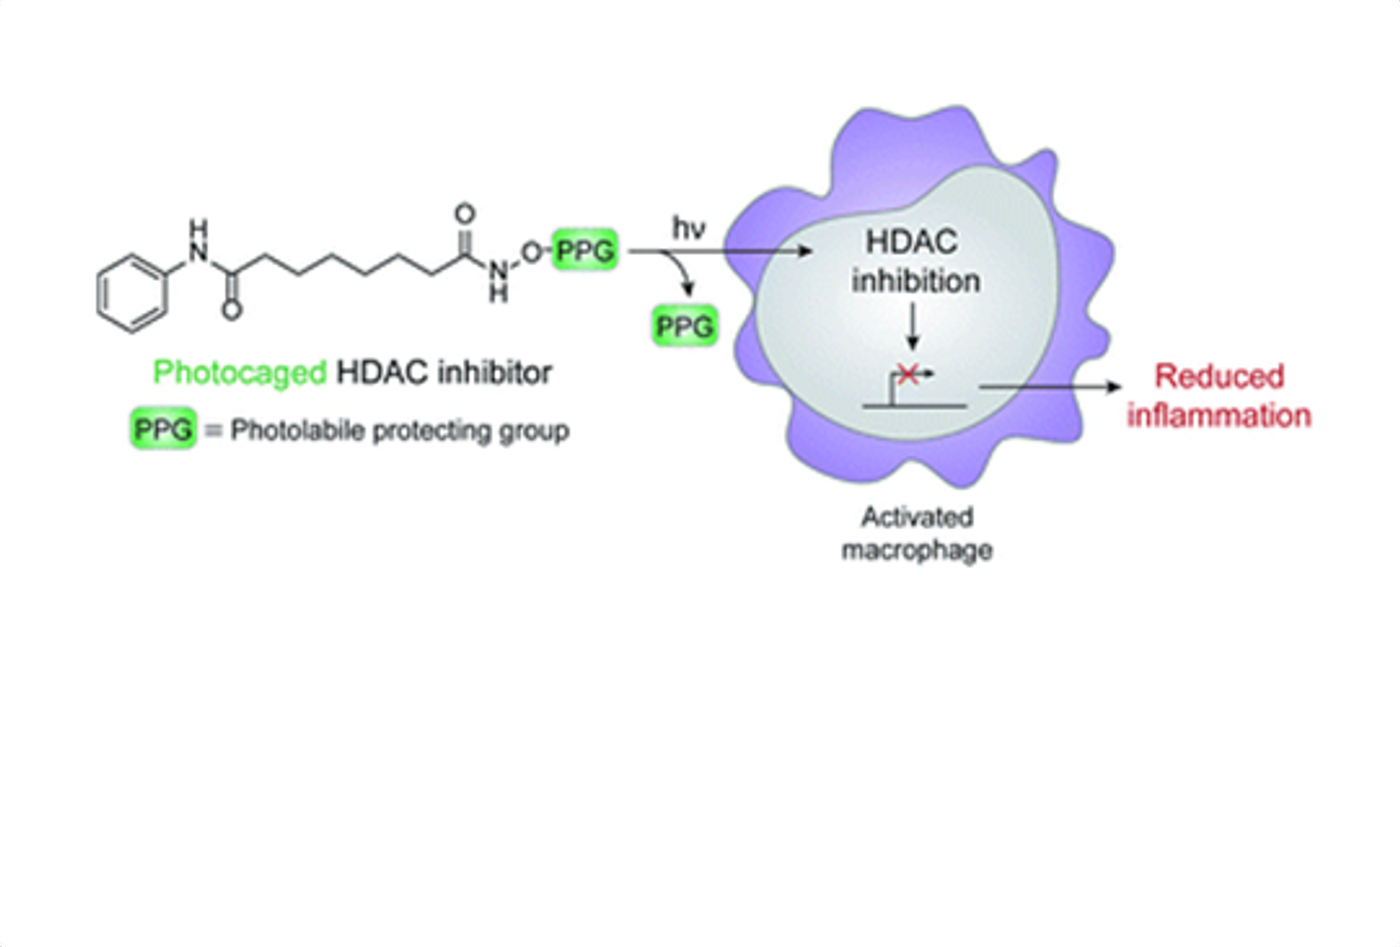 The HDAC inhibition reaction (Parasar and Chang, 2016)